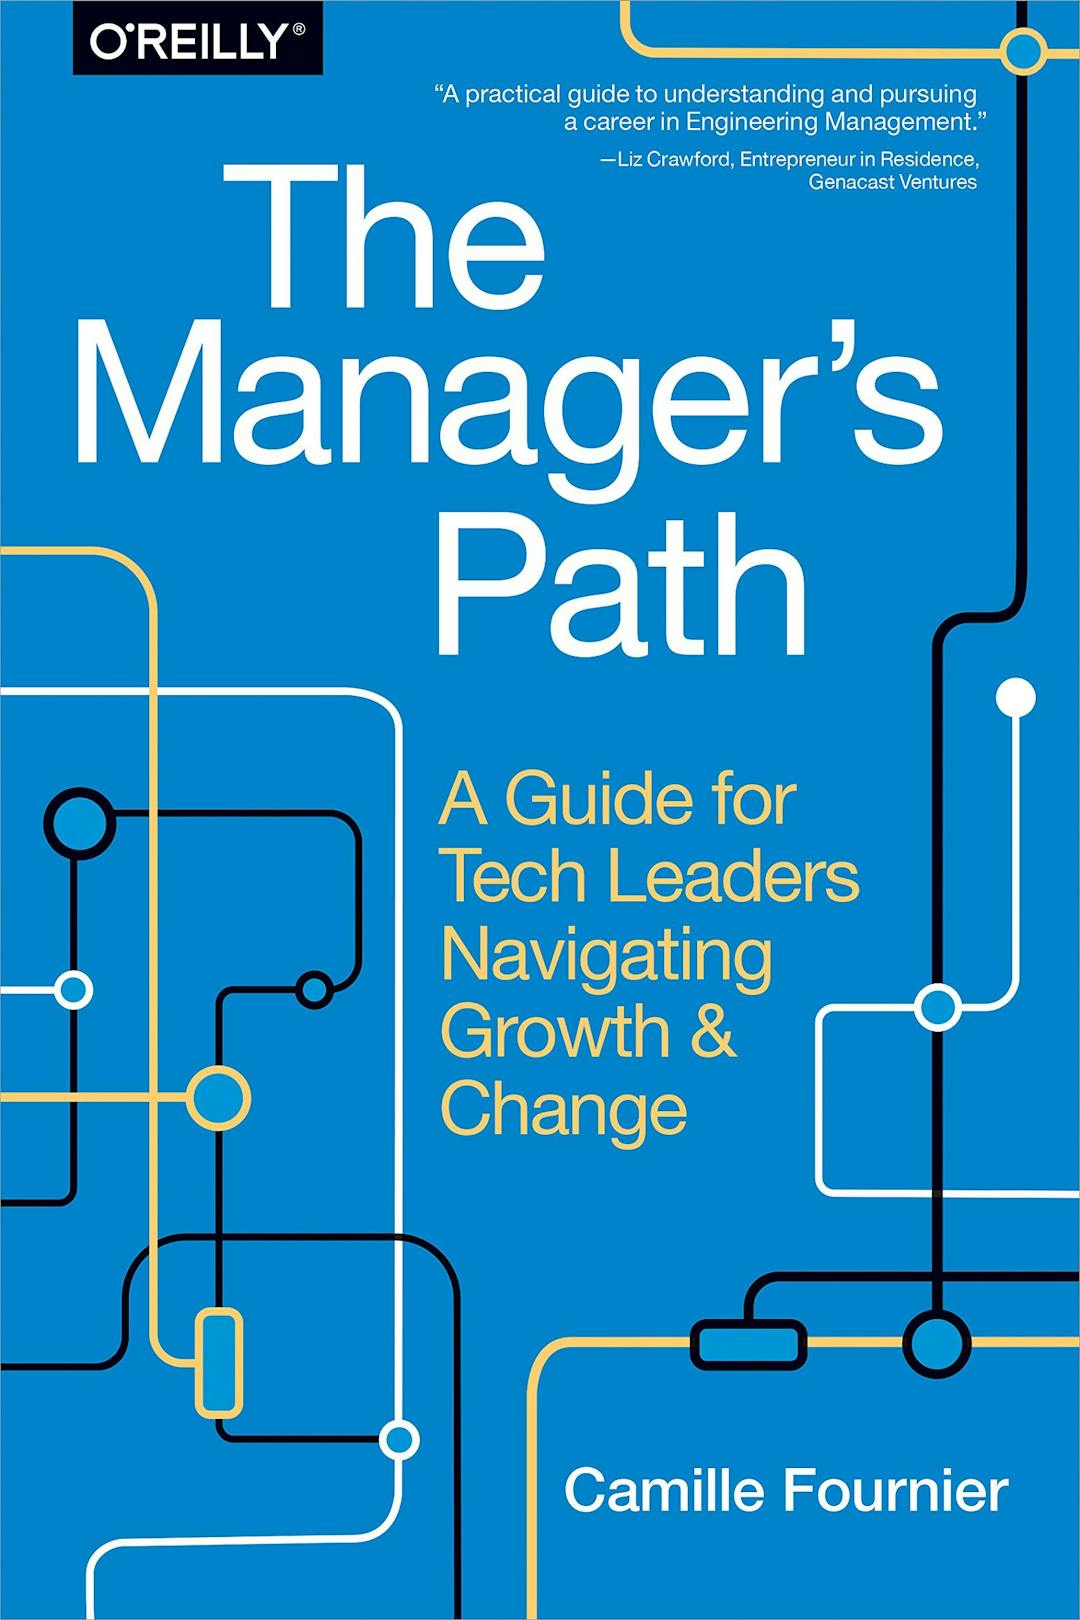 The Manager's Path: A Guide for Tech Leaders Navigating Growth, by Camille Fournier